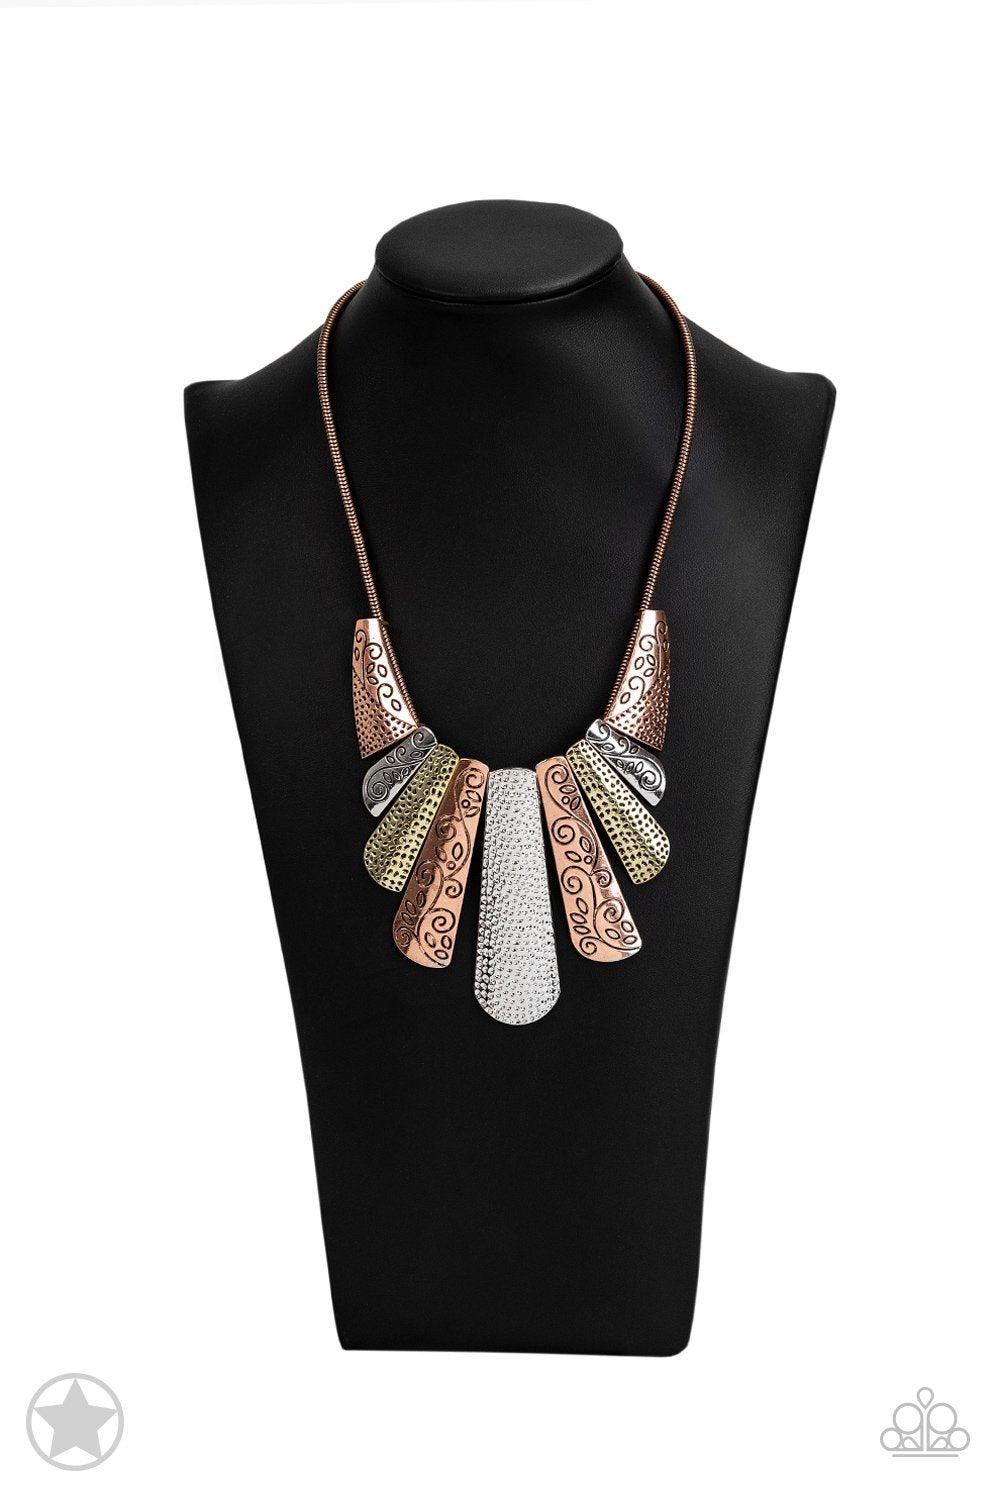 Untamed Silver Copper and Brass Statement Necklace and matching Earrings - Paparazzi Accessories- on bust -CarasShop.com - $5 Jewelry by Cara Jewels